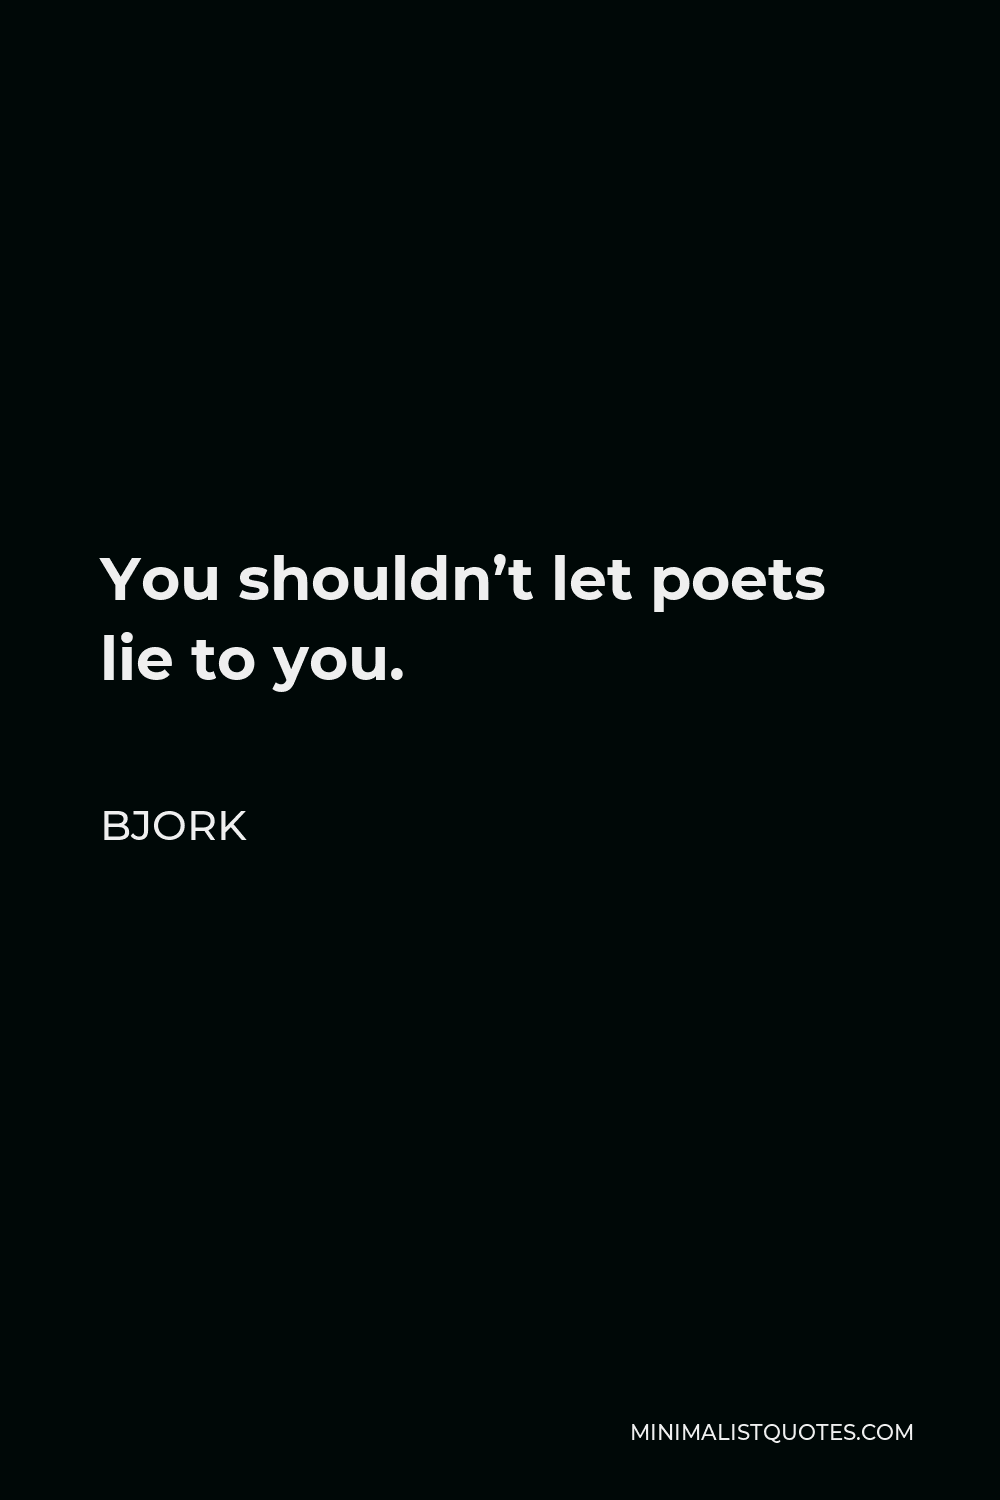 Bjork Quote - You shouldn’t let poets lie to you.